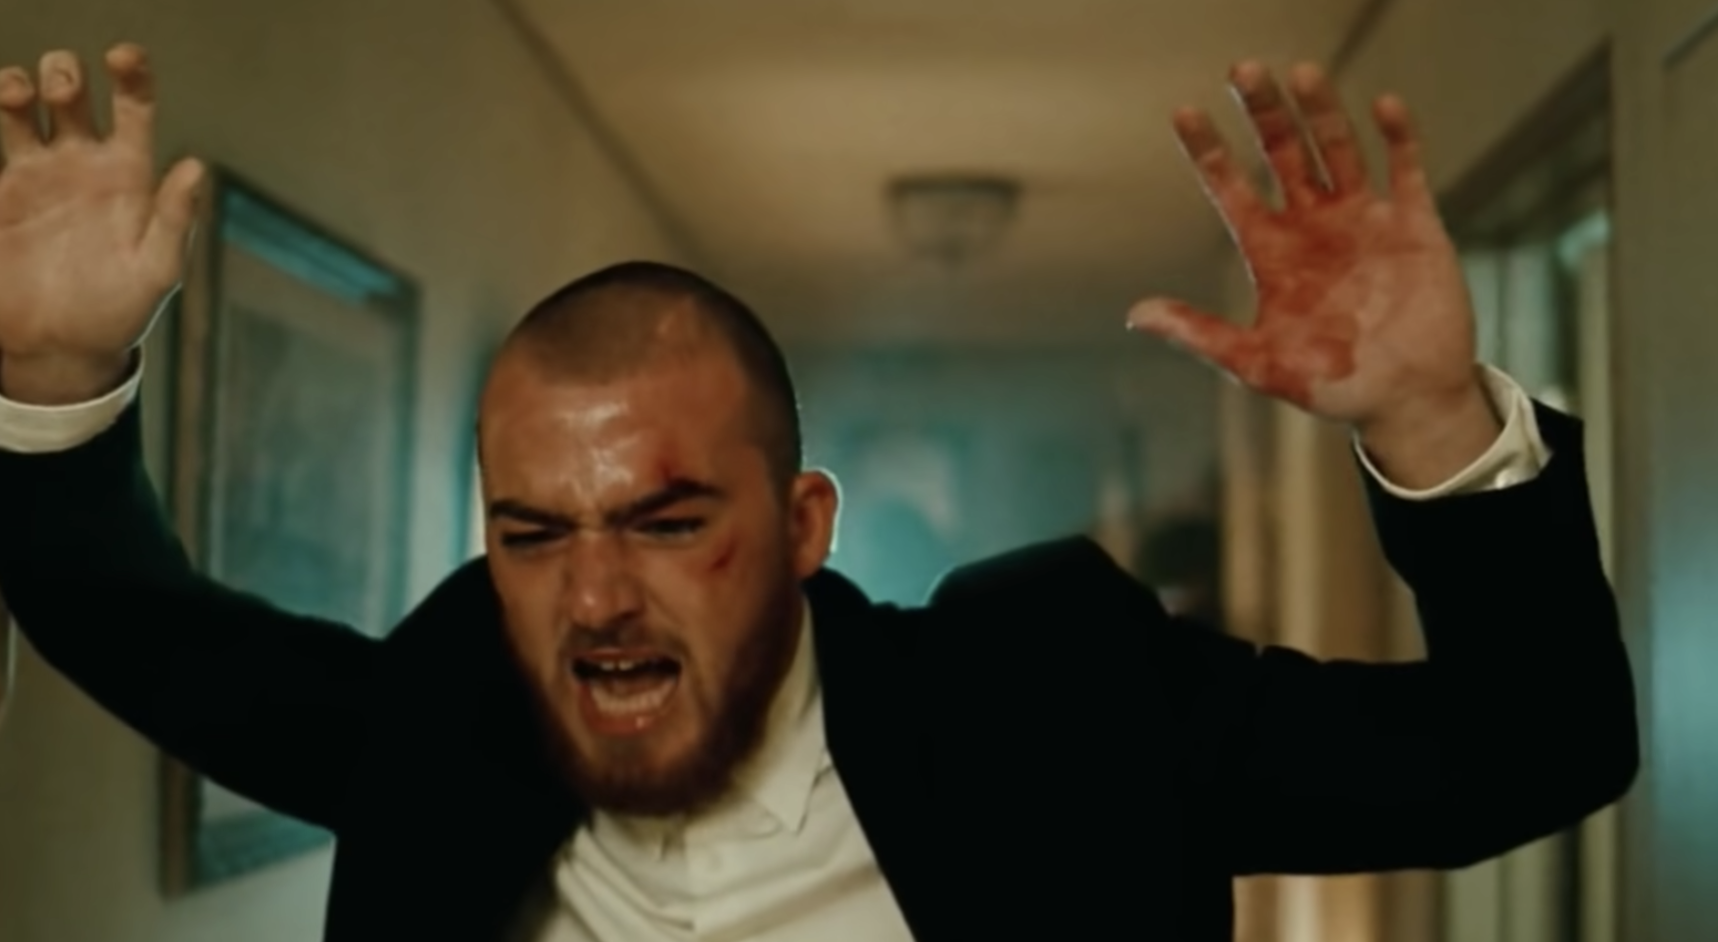 Close-up of Angus in a scene from Euphoria with his hands, one bloody, raised and looking very agitated